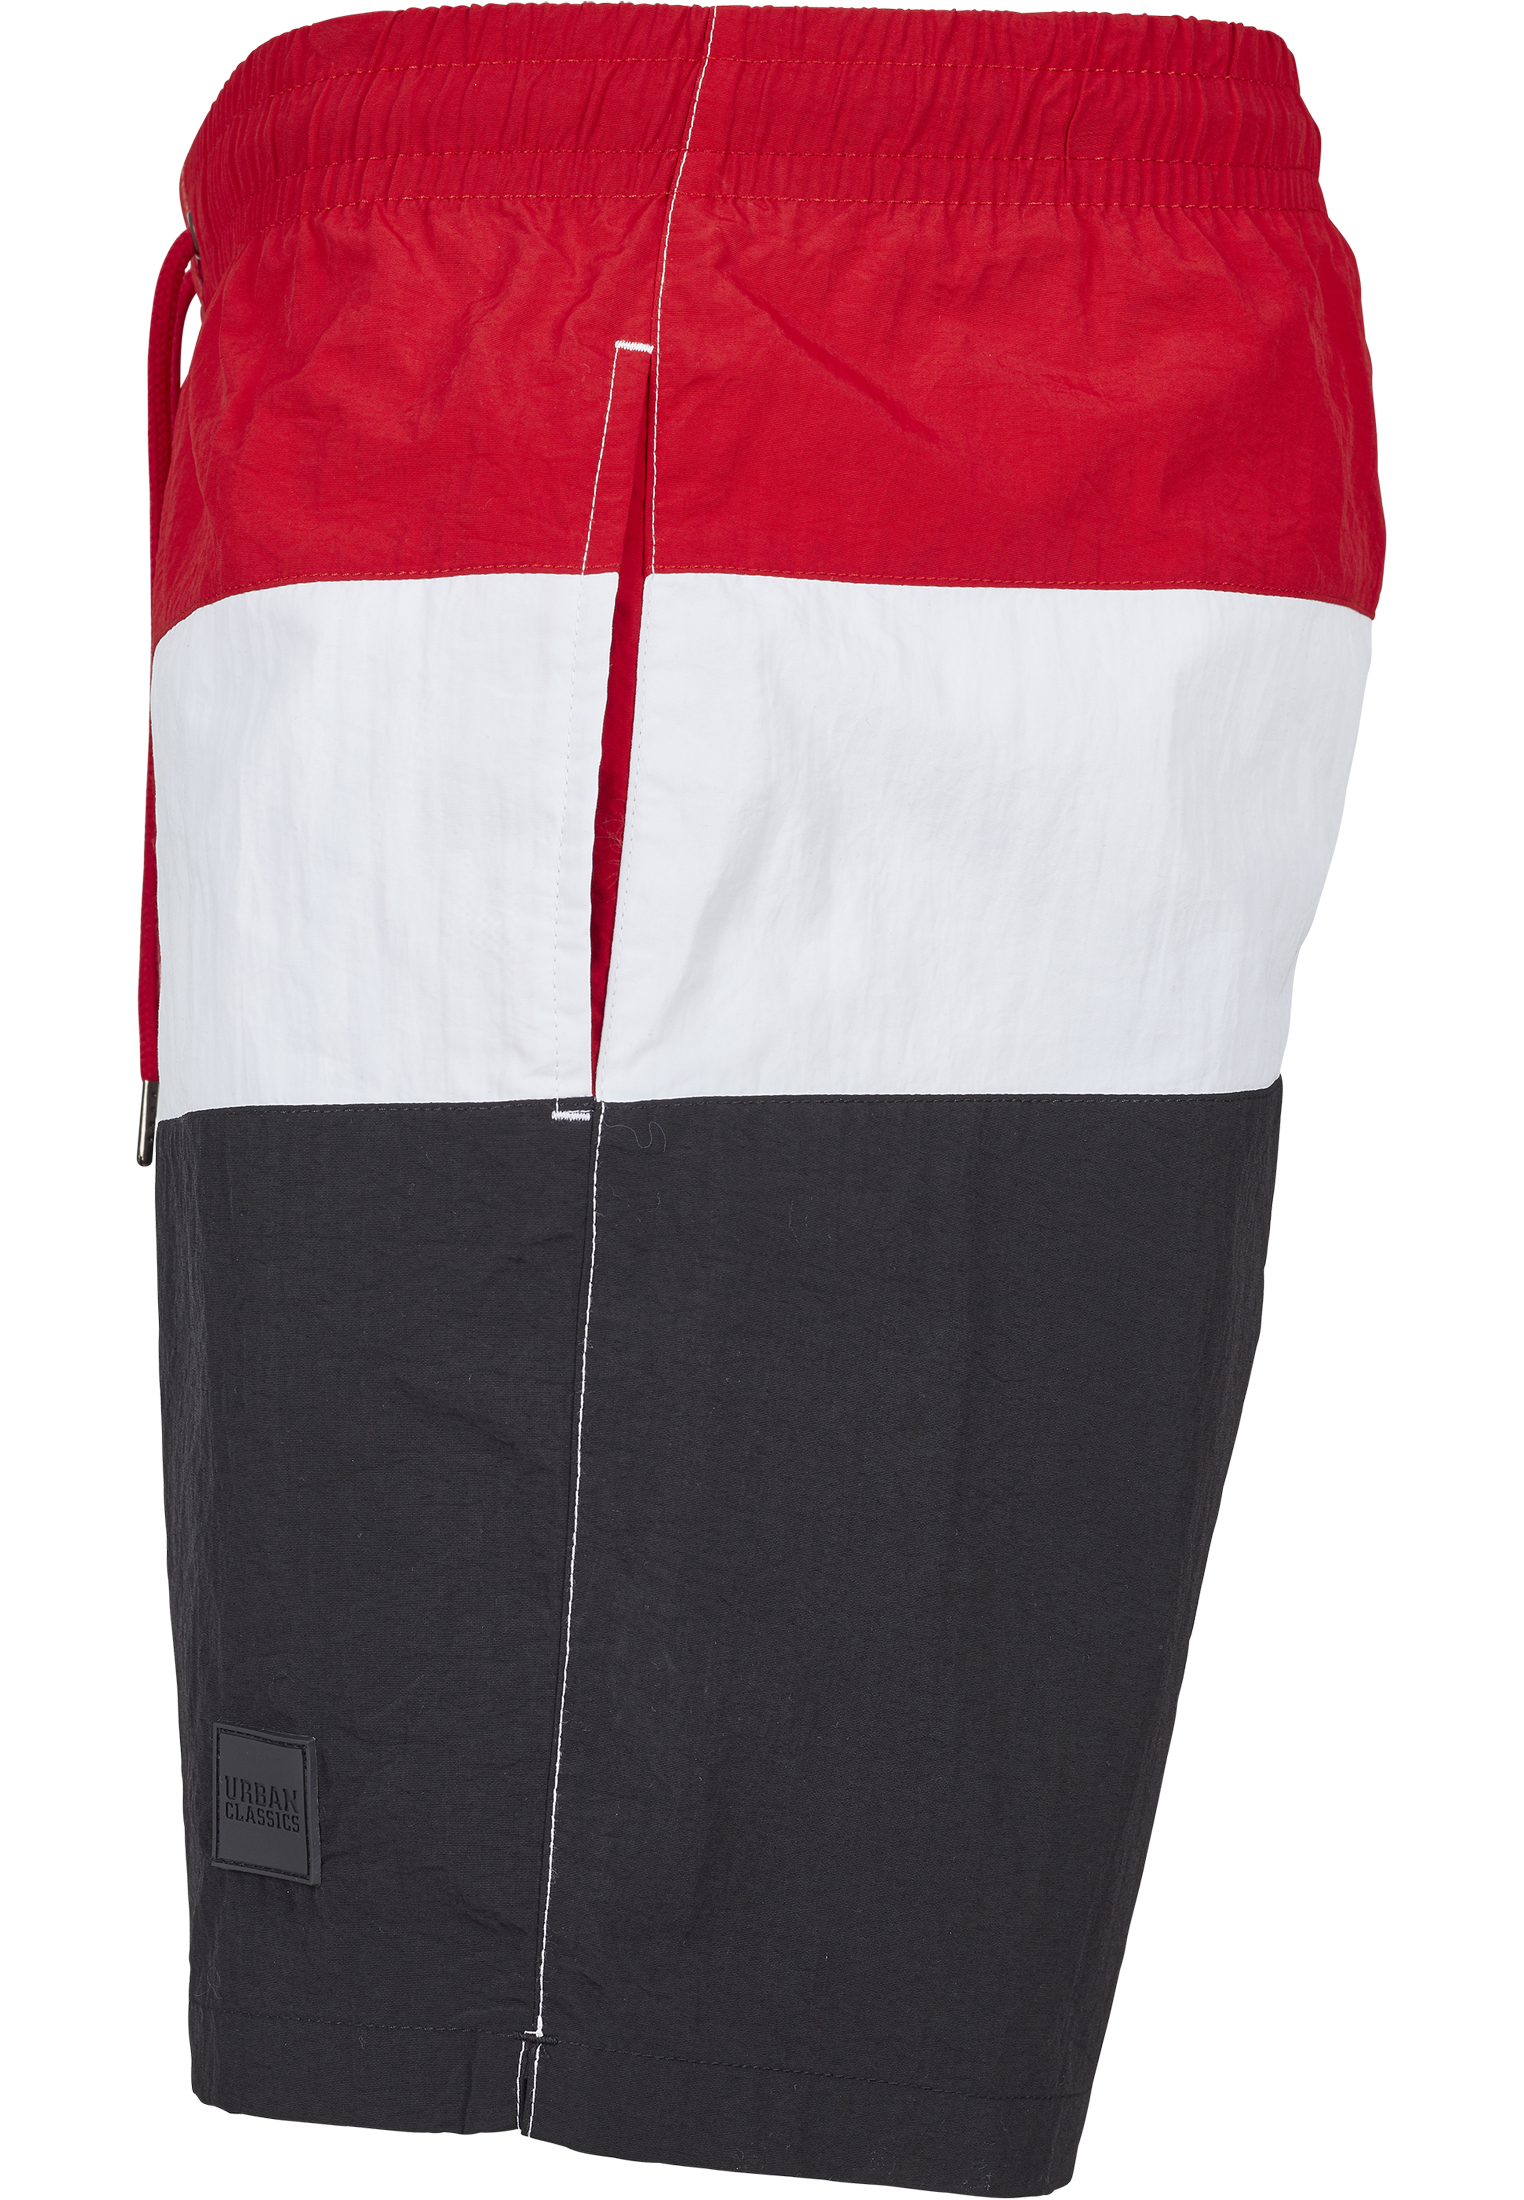 Bademode Color Block Swimshorts in Farbe blk/firered/wht